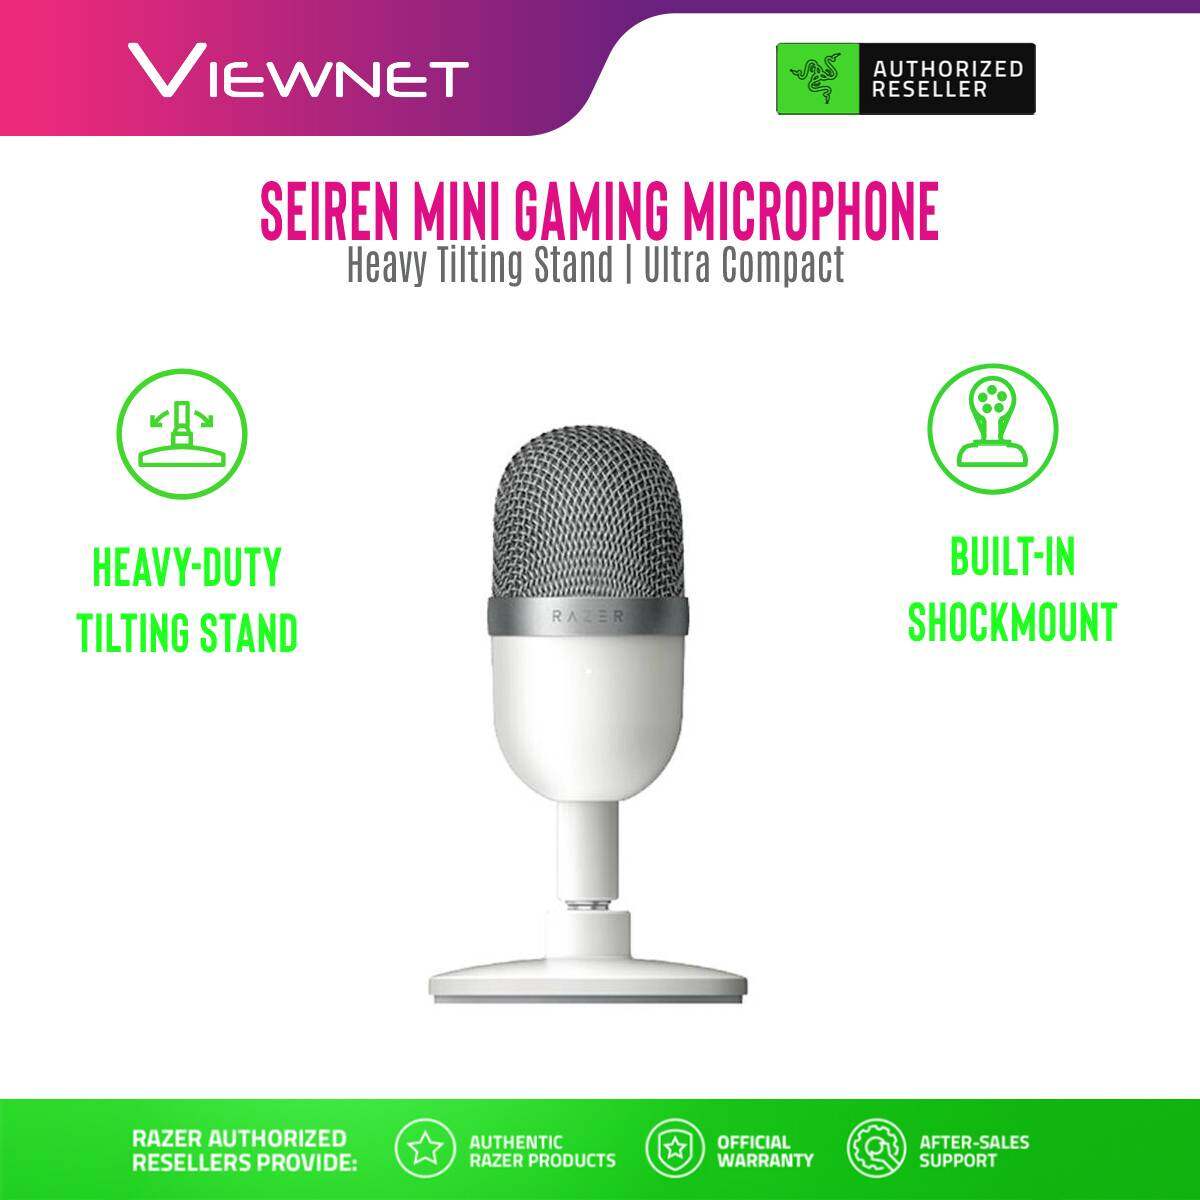 Razer Seiren Mini Gaming Mic with Ultra-Precise Supercardioid Pickup Pattern, Heavy-Duty Tilting Stand, USB Plug And Play